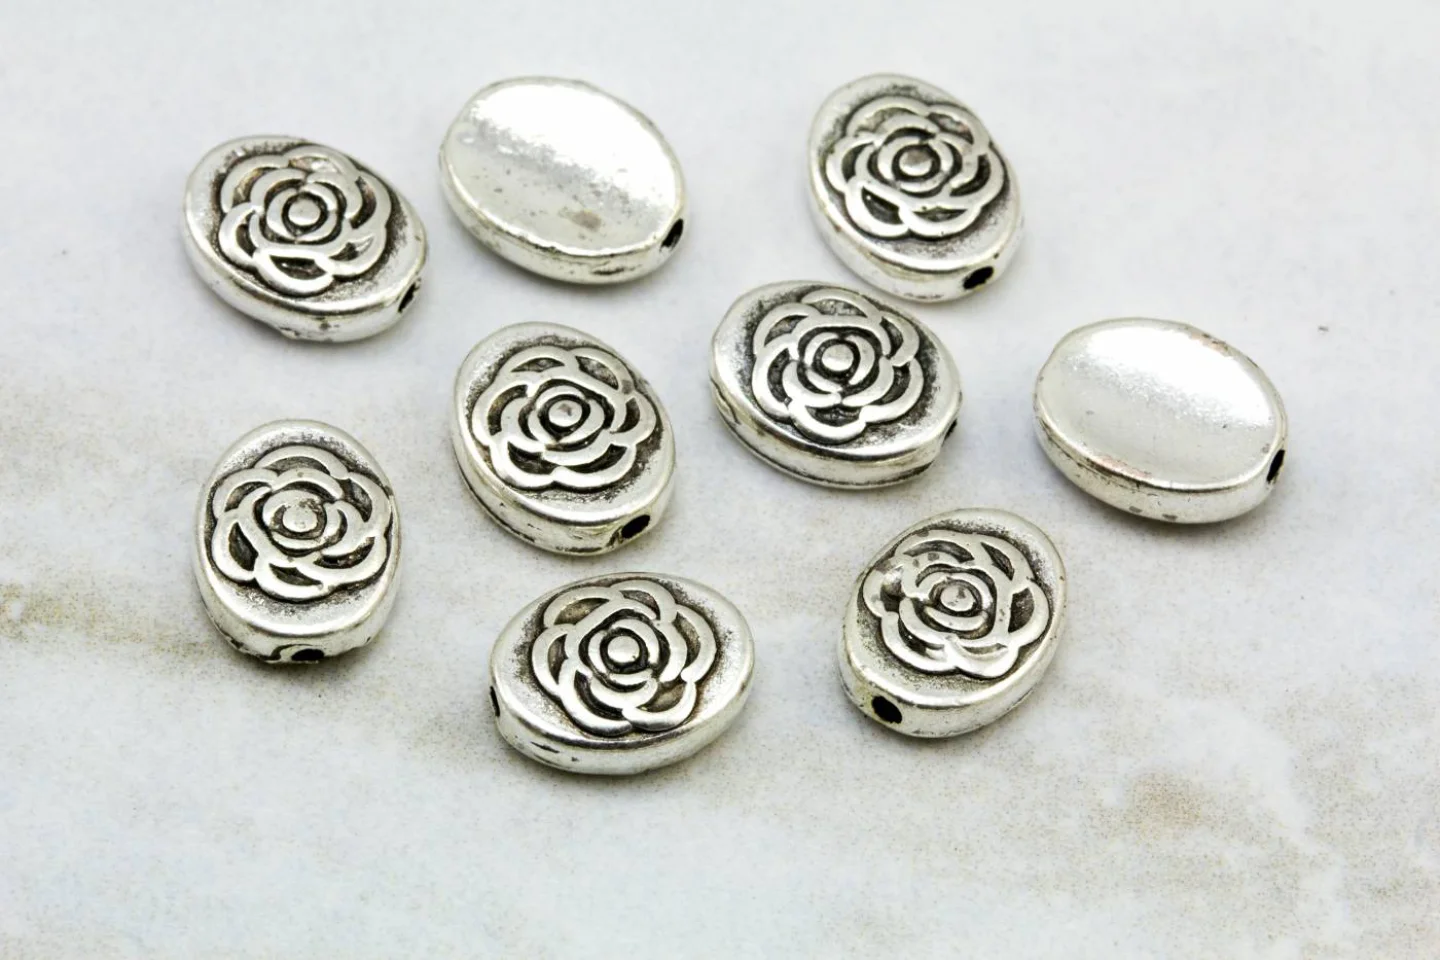 rose-pattern-jewelry-charms-metal-beads.